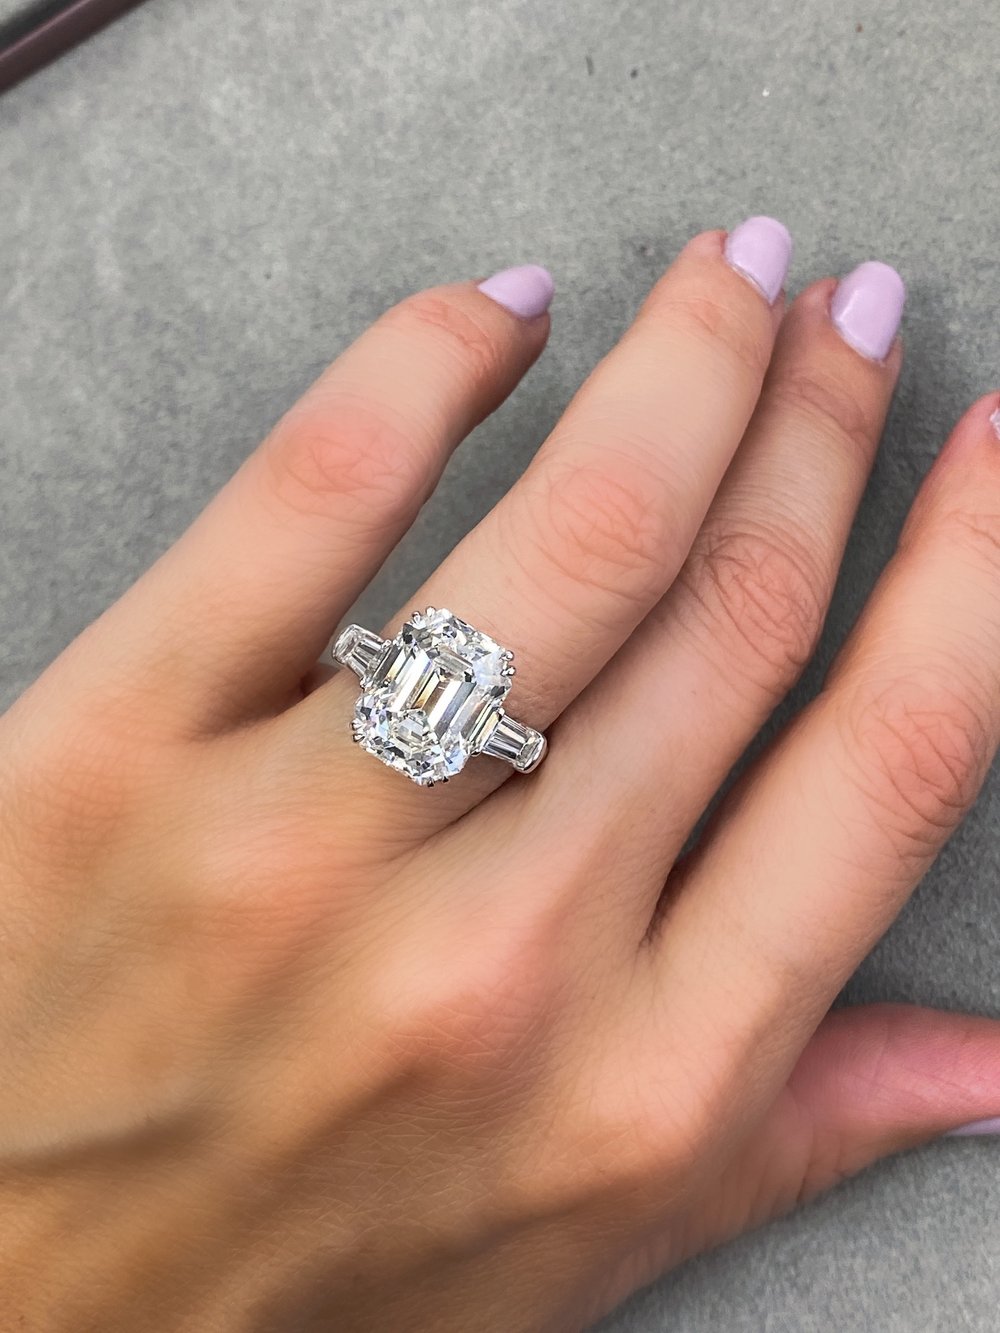 How Big Is Too Big for a Diamond Engagement Ring? - Lel